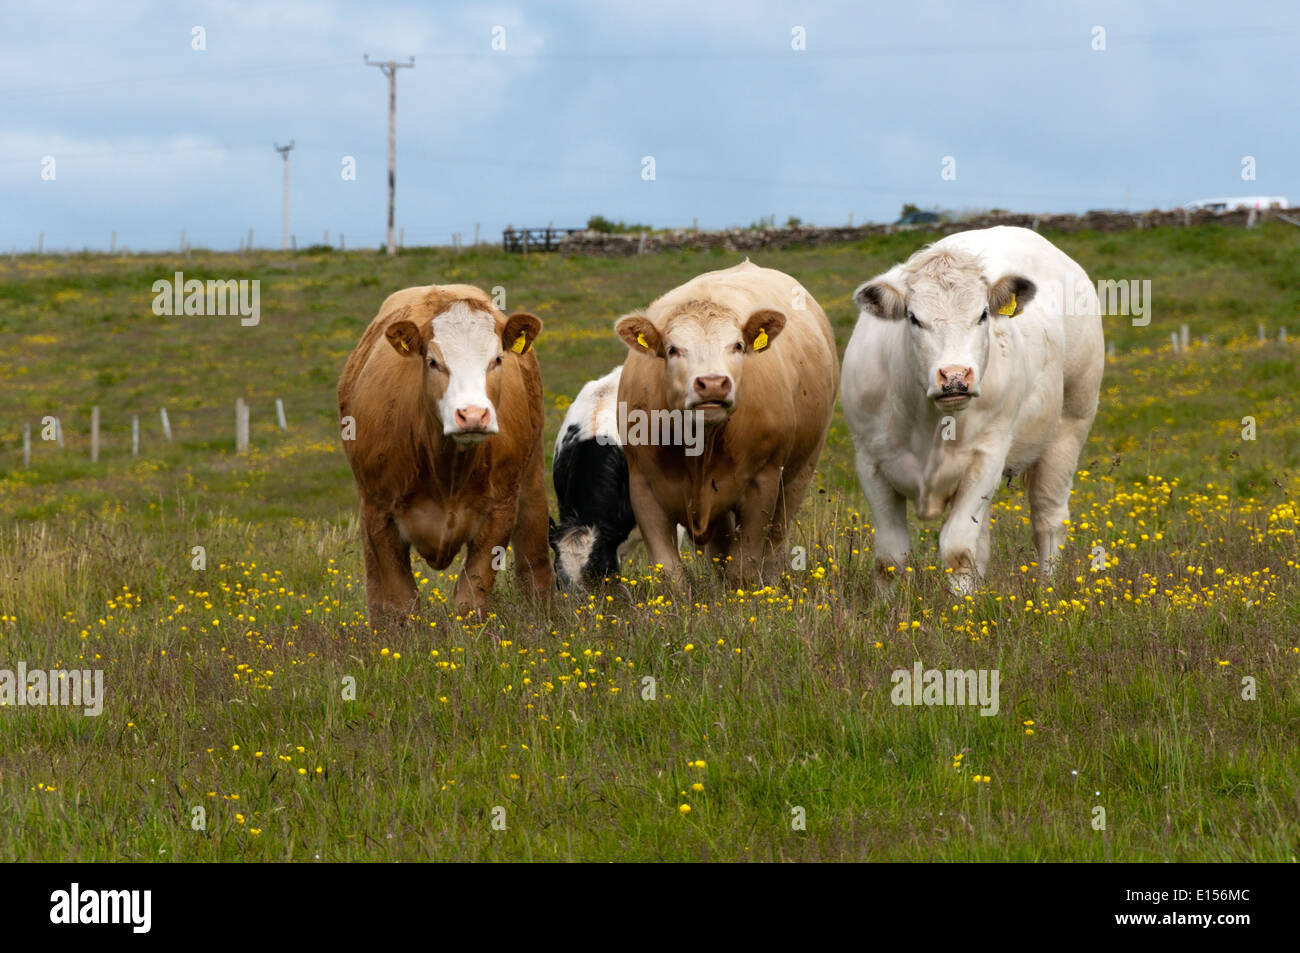 A group of three cows looking at the camera. Stock Photo